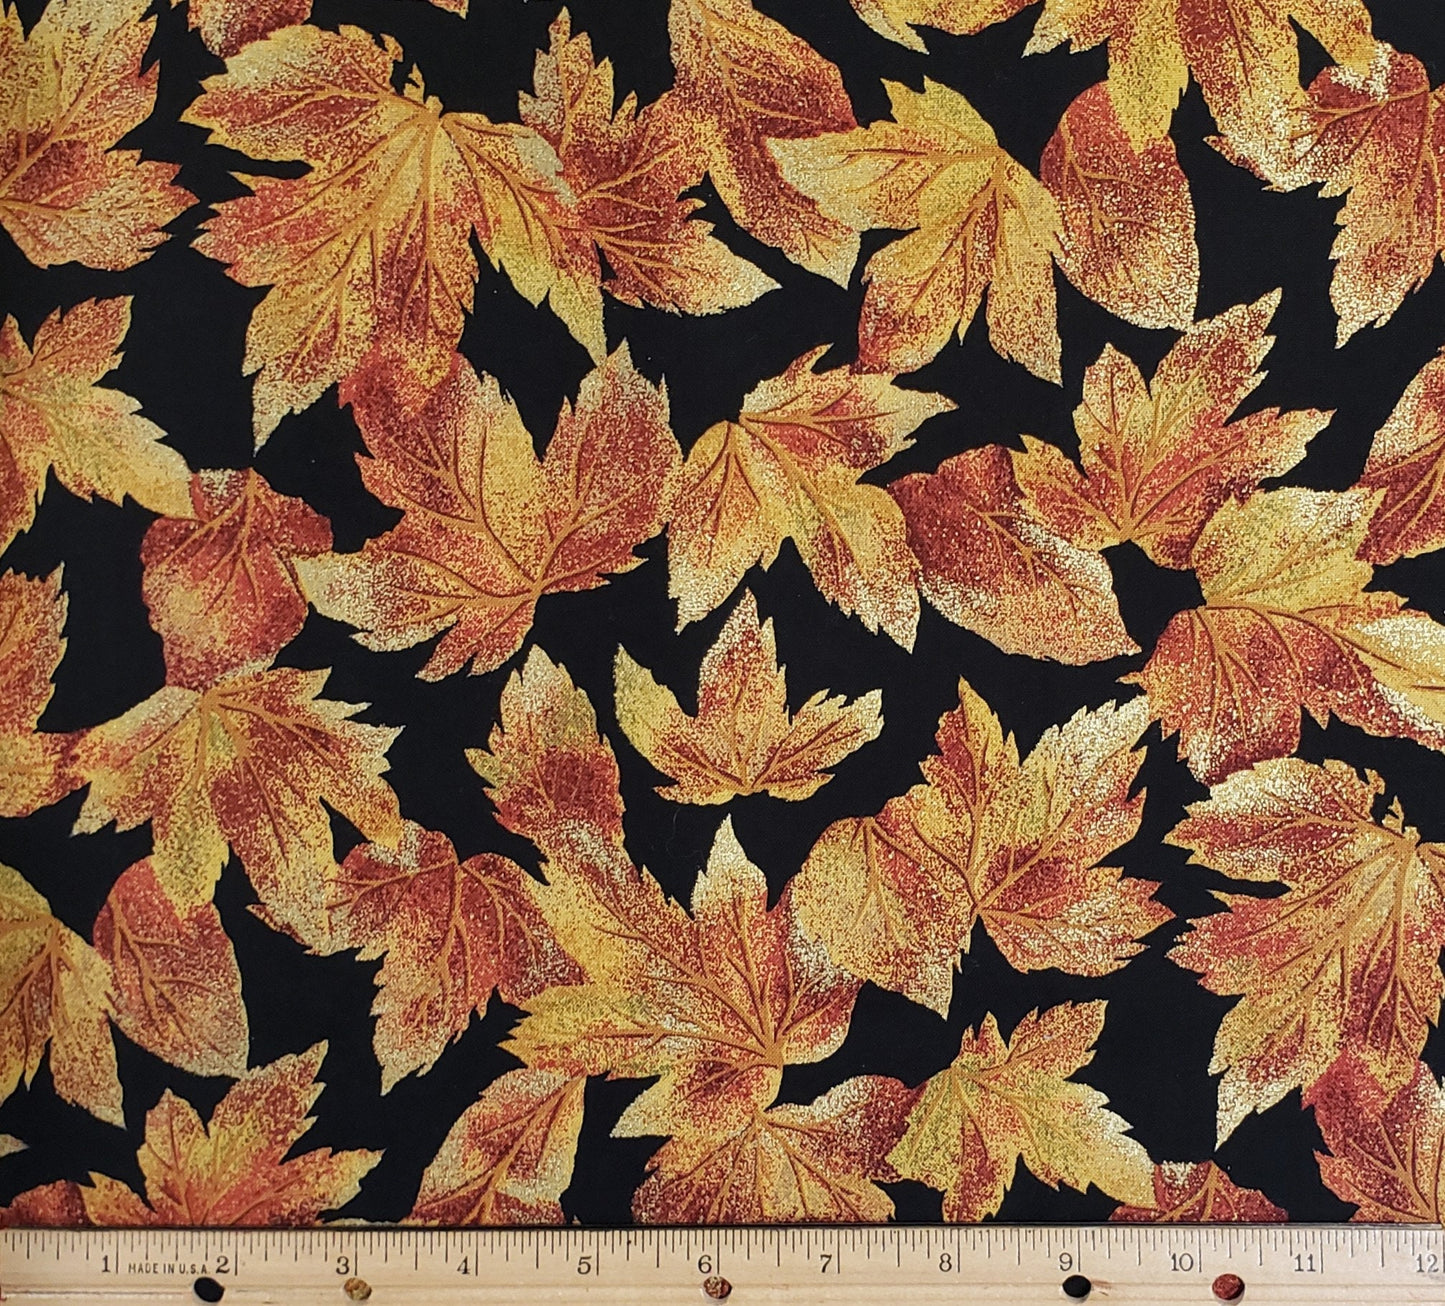 Black Fabric with Dark Red, Burnt Orange and Gold Leaves with Metallic Accents